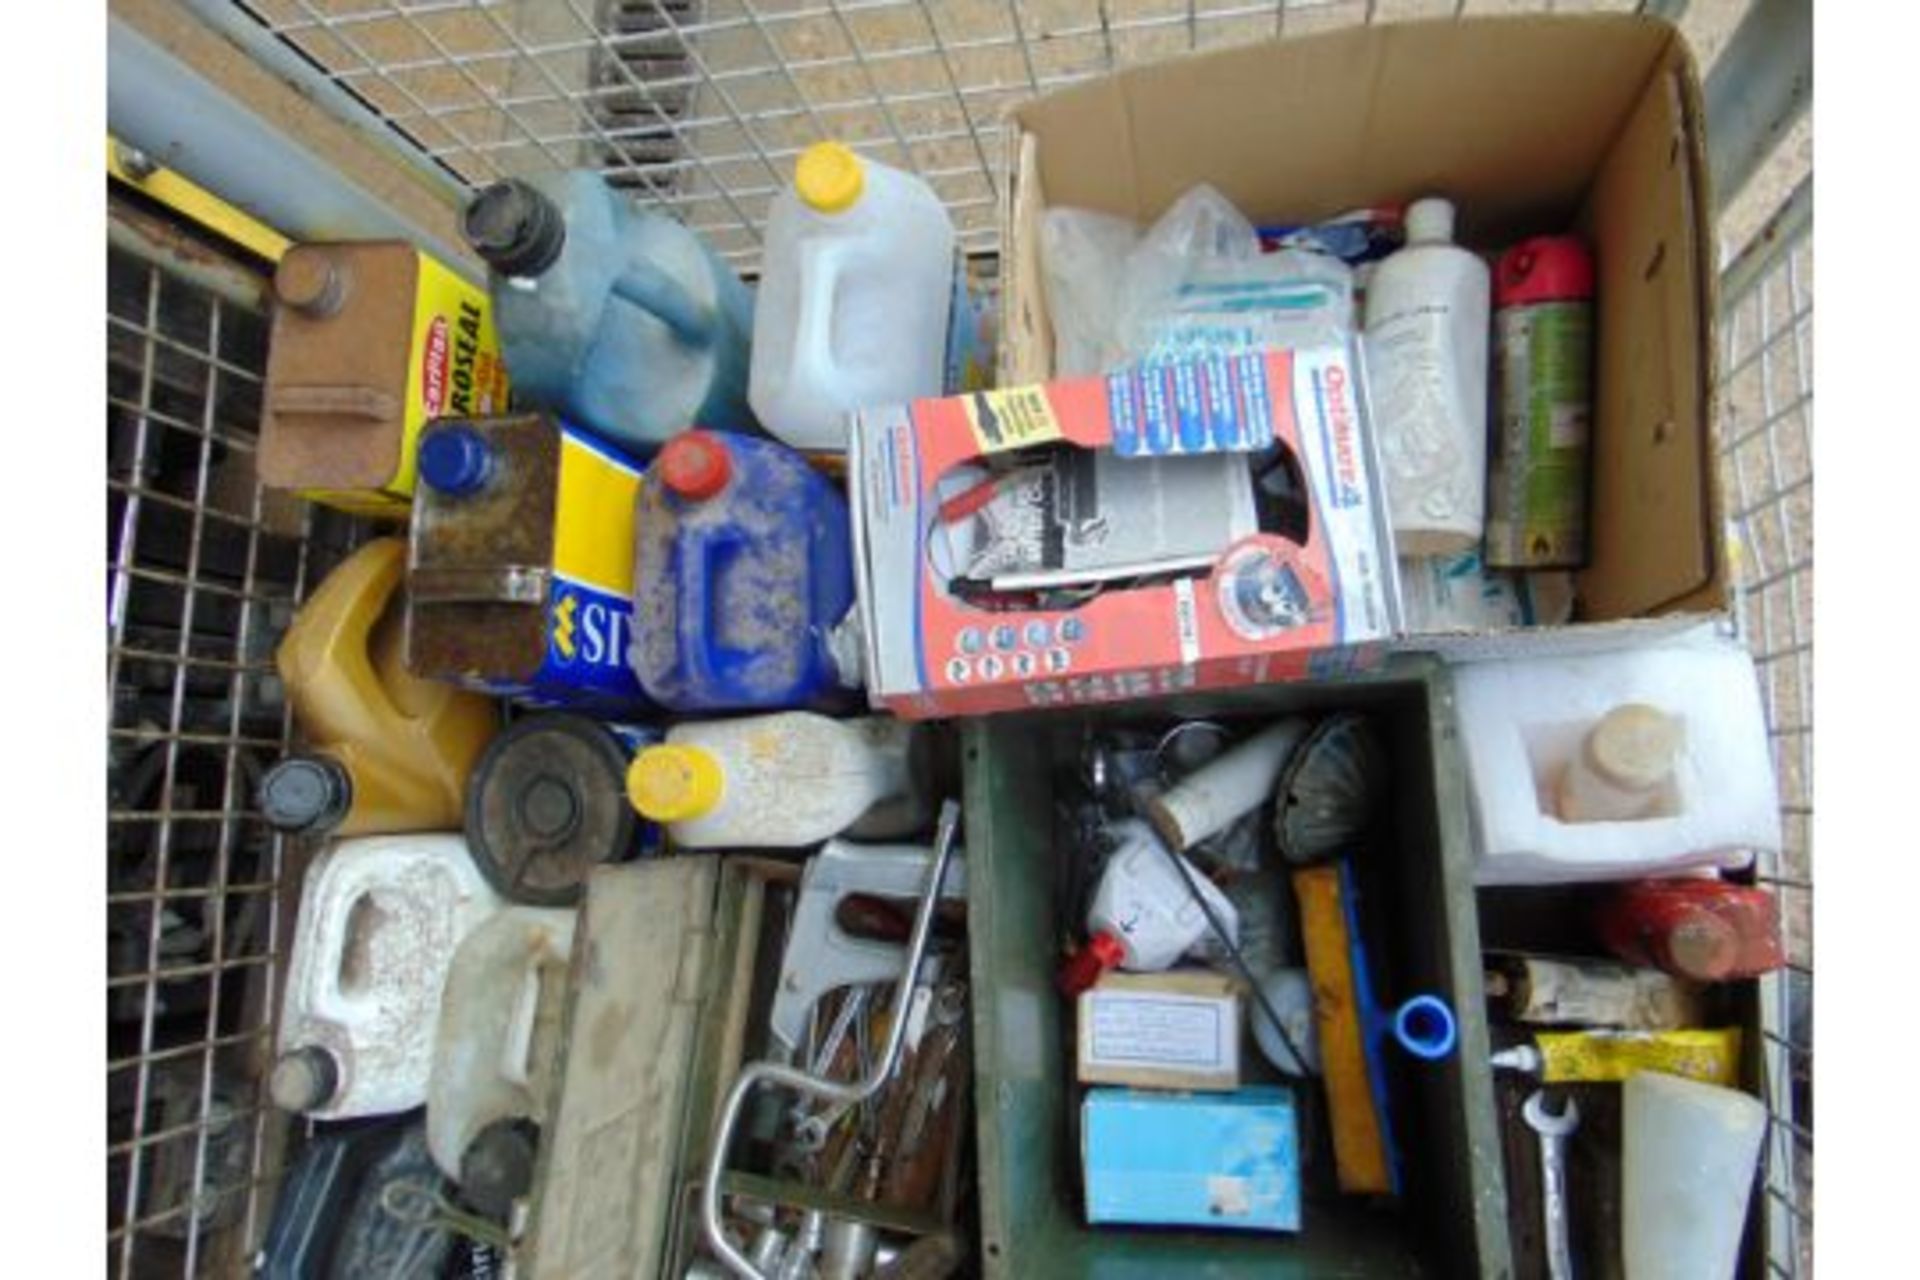 Stillage of Tools, Oils, Cleaners, Grease etc. - Image 3 of 3